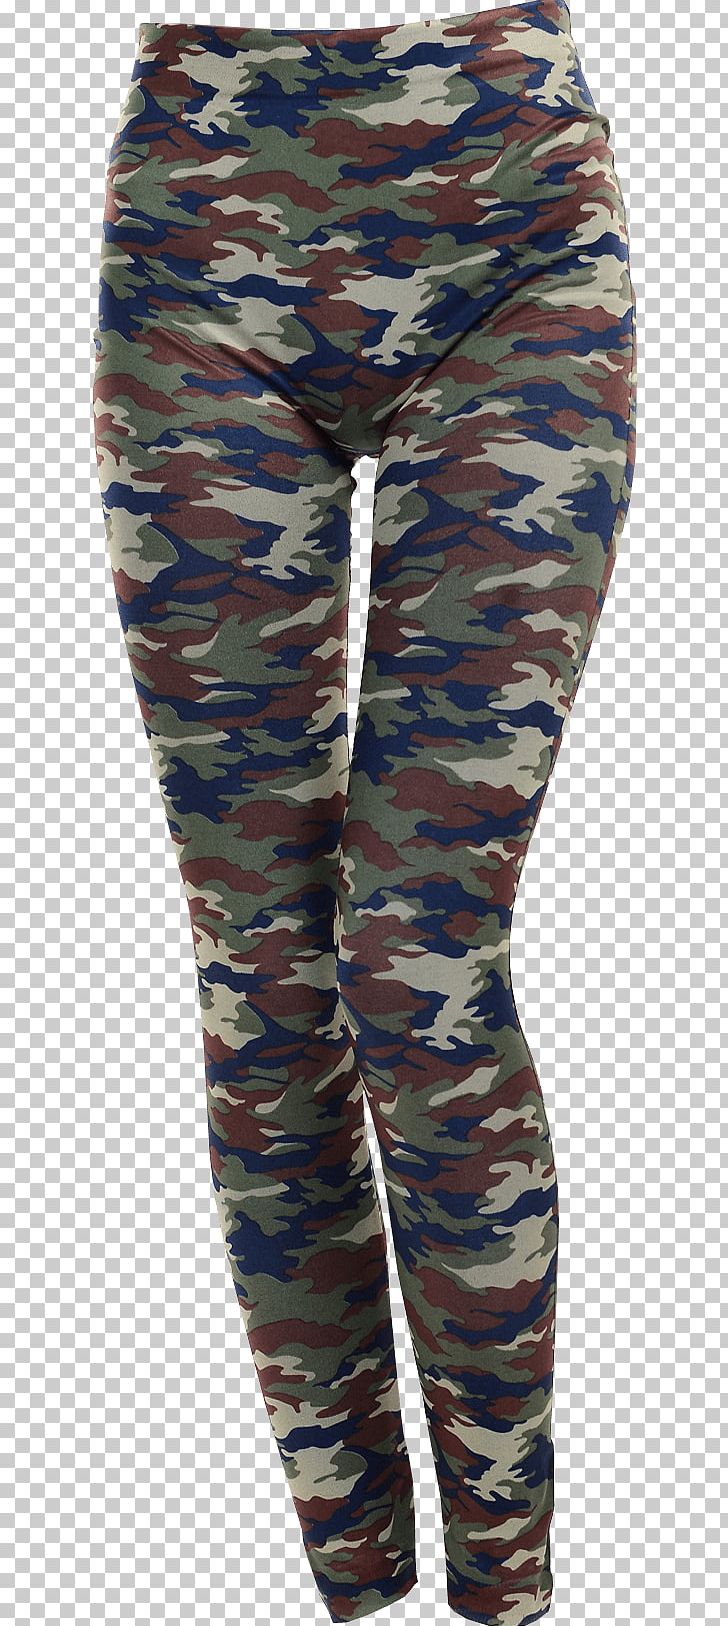 Leggings Military Camouflage Yoga Pants Jeggings PNG, Clipart, Army, Cargo Pants, Clothing, Fashion, Jeans Free PNG Download